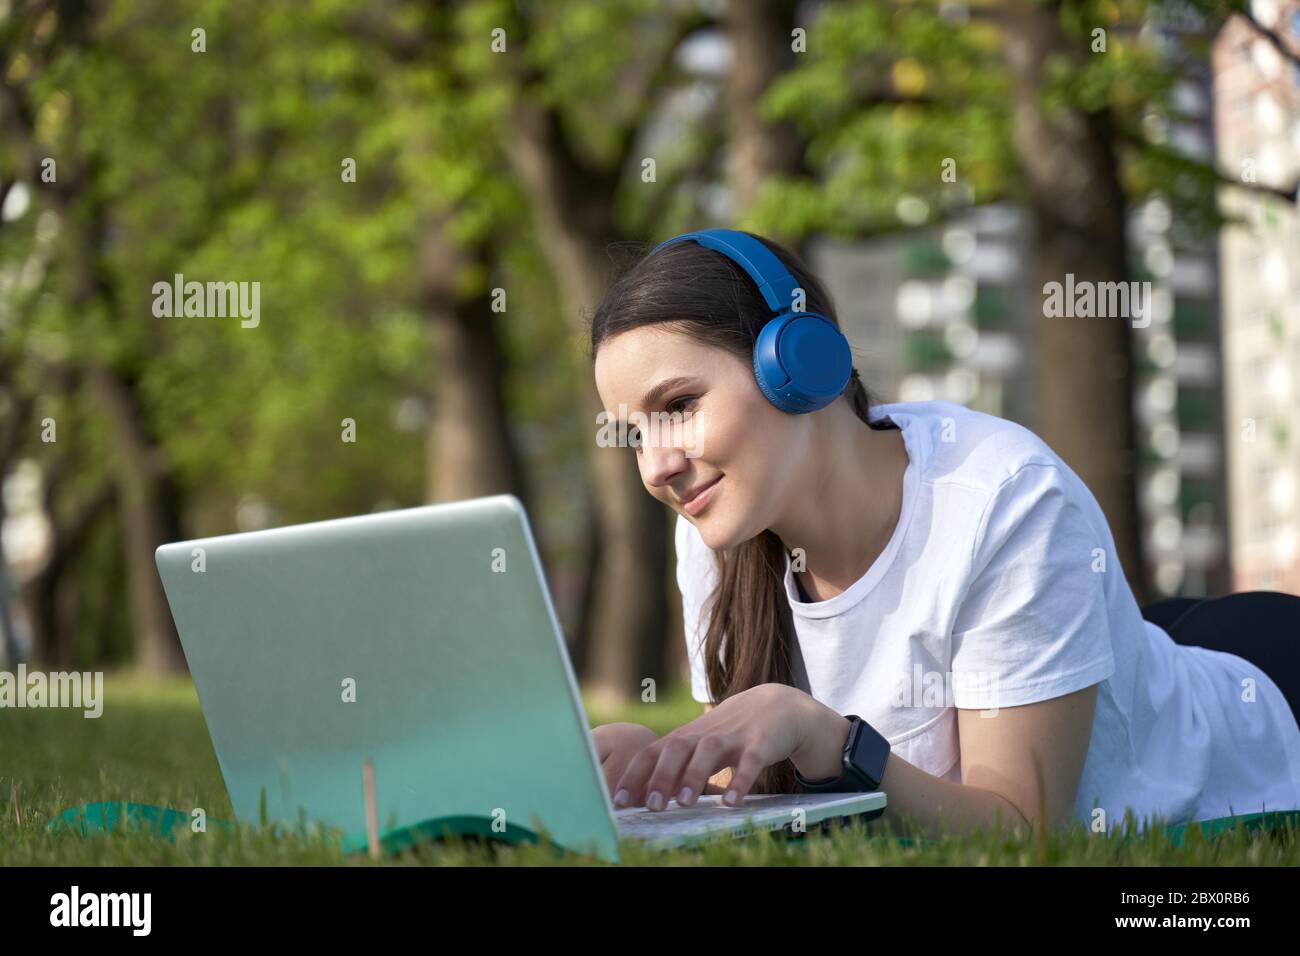 athletic healthy girl in the headphones working in nature. Stock Photo